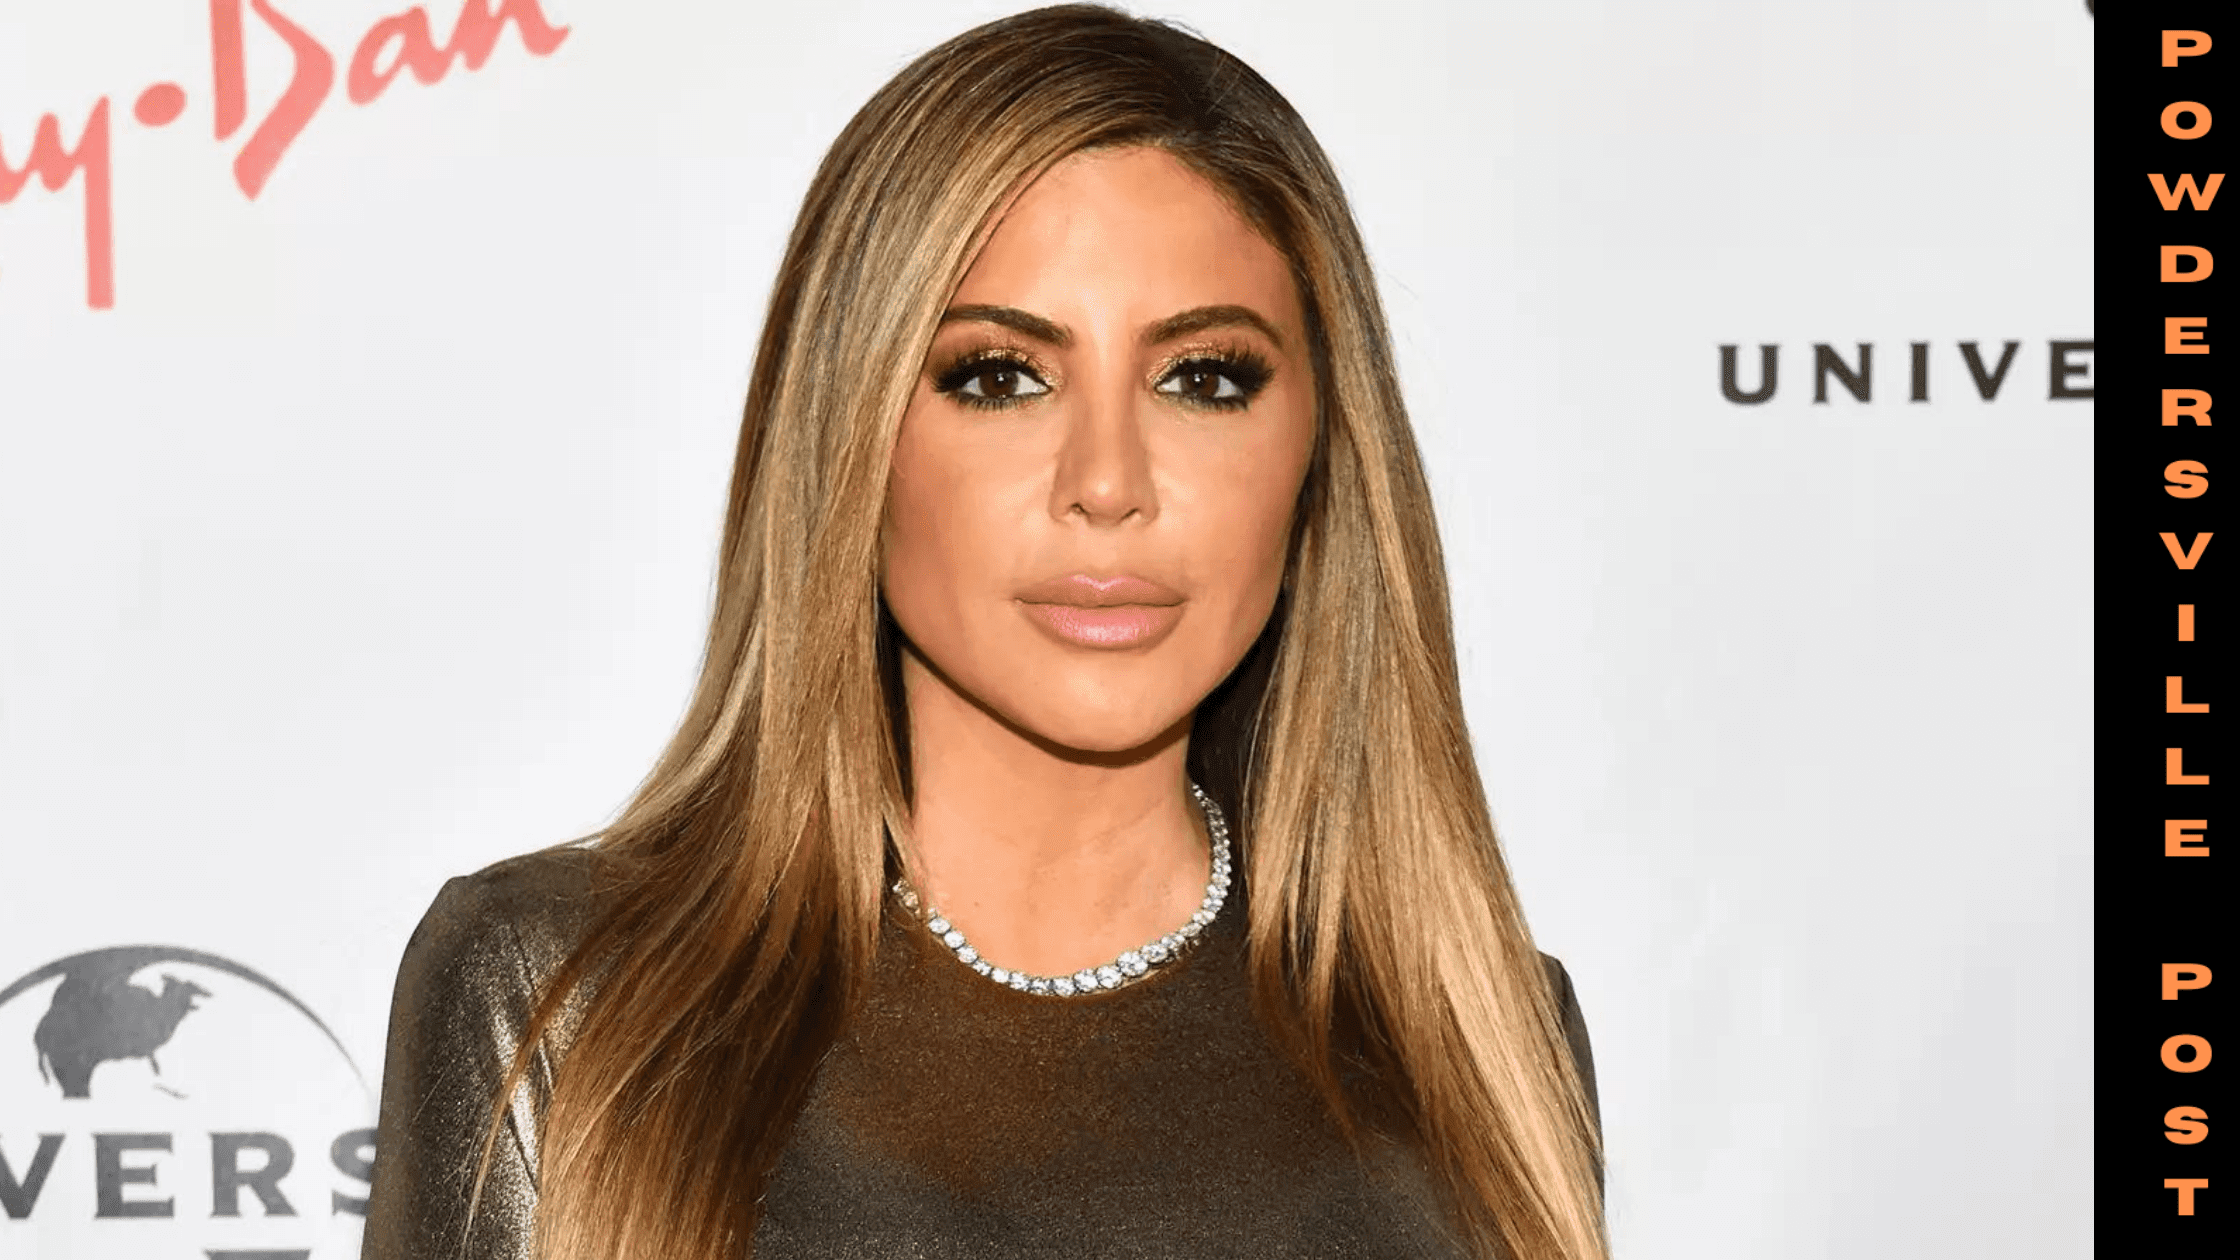 Larissa Pippen Dismisses Rumors About Plastic Surgery, She Doesn't Have To Talk About It,